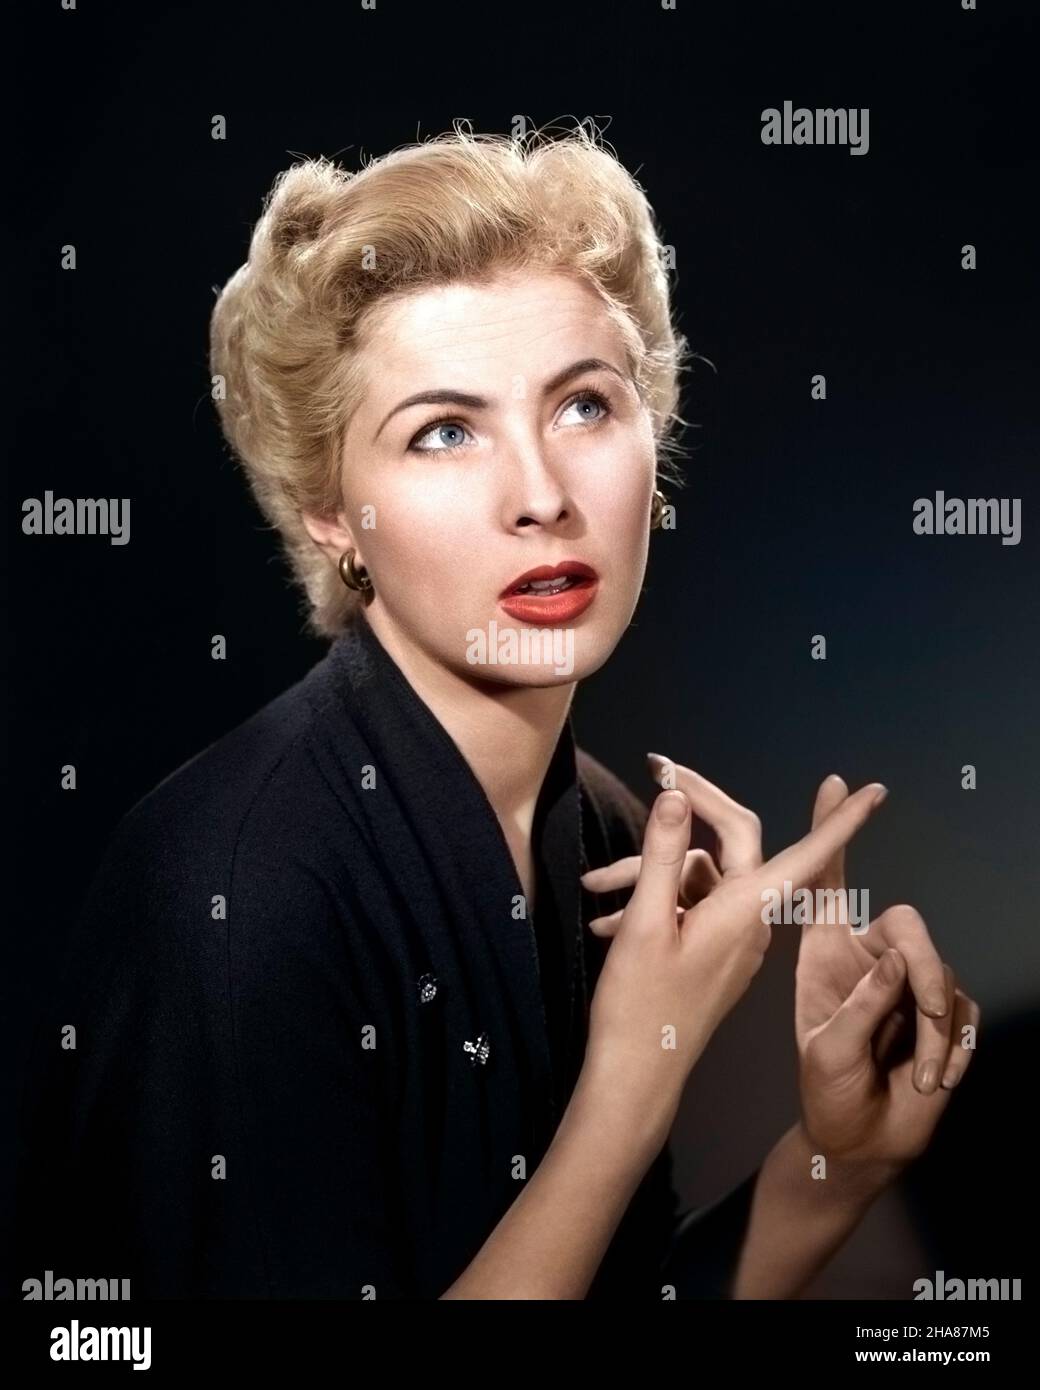 1950s THOUGHTFUL BLOND WOMAN COUNTING ON HER FINGERS LOOKING AWAY - g1713c HAR001 HARS PENSIVE PERSONS THOUGHTFUL AWAY GROWN-UP PLANNING GOALS DREAMS HEAD AND SHOULDERS STRATEGY ADDING COUNT CHOICE HAIRSTYLE KNOWLEDGE REFLECTIVE THINK REFLECTING SPOKESPERSON PONDER PONDERING CONSIDER LOST IN THOUGHT CONTEMPLATIVE ENUMERATING ENUMERATE FIGURING MEDITATE CALCULATE LOOKING AWAY LOOKING UP MEDITATIVE MID-ADULT MID-ADULT WOMAN PEOPLE ADULTS WONDERING CAUCASIAN ETHNICITY CONSIDERING HAR001 OLD FASHIONED PERPLEXED UNCERTAIN Stock Photo